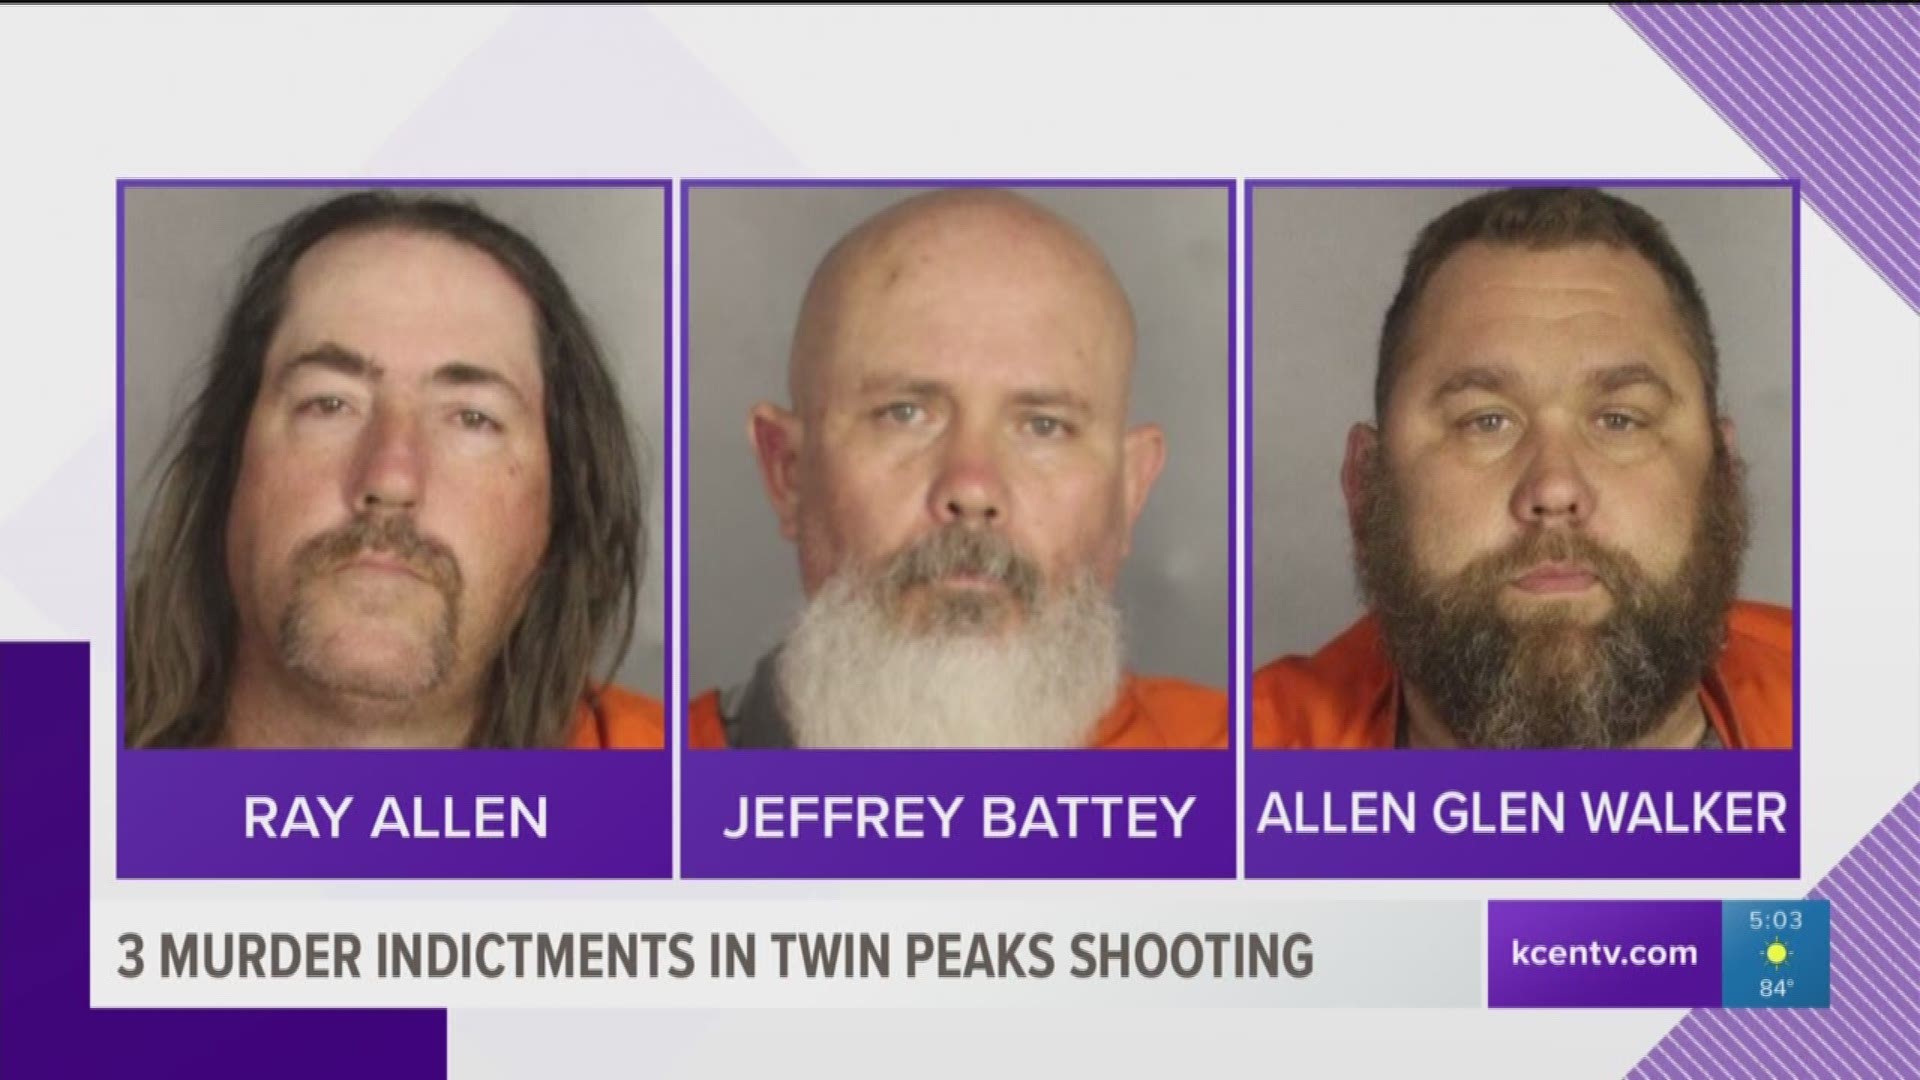 Three bikers were indicted on murder charges stemming from the 2016 Twin Peaks shooting.